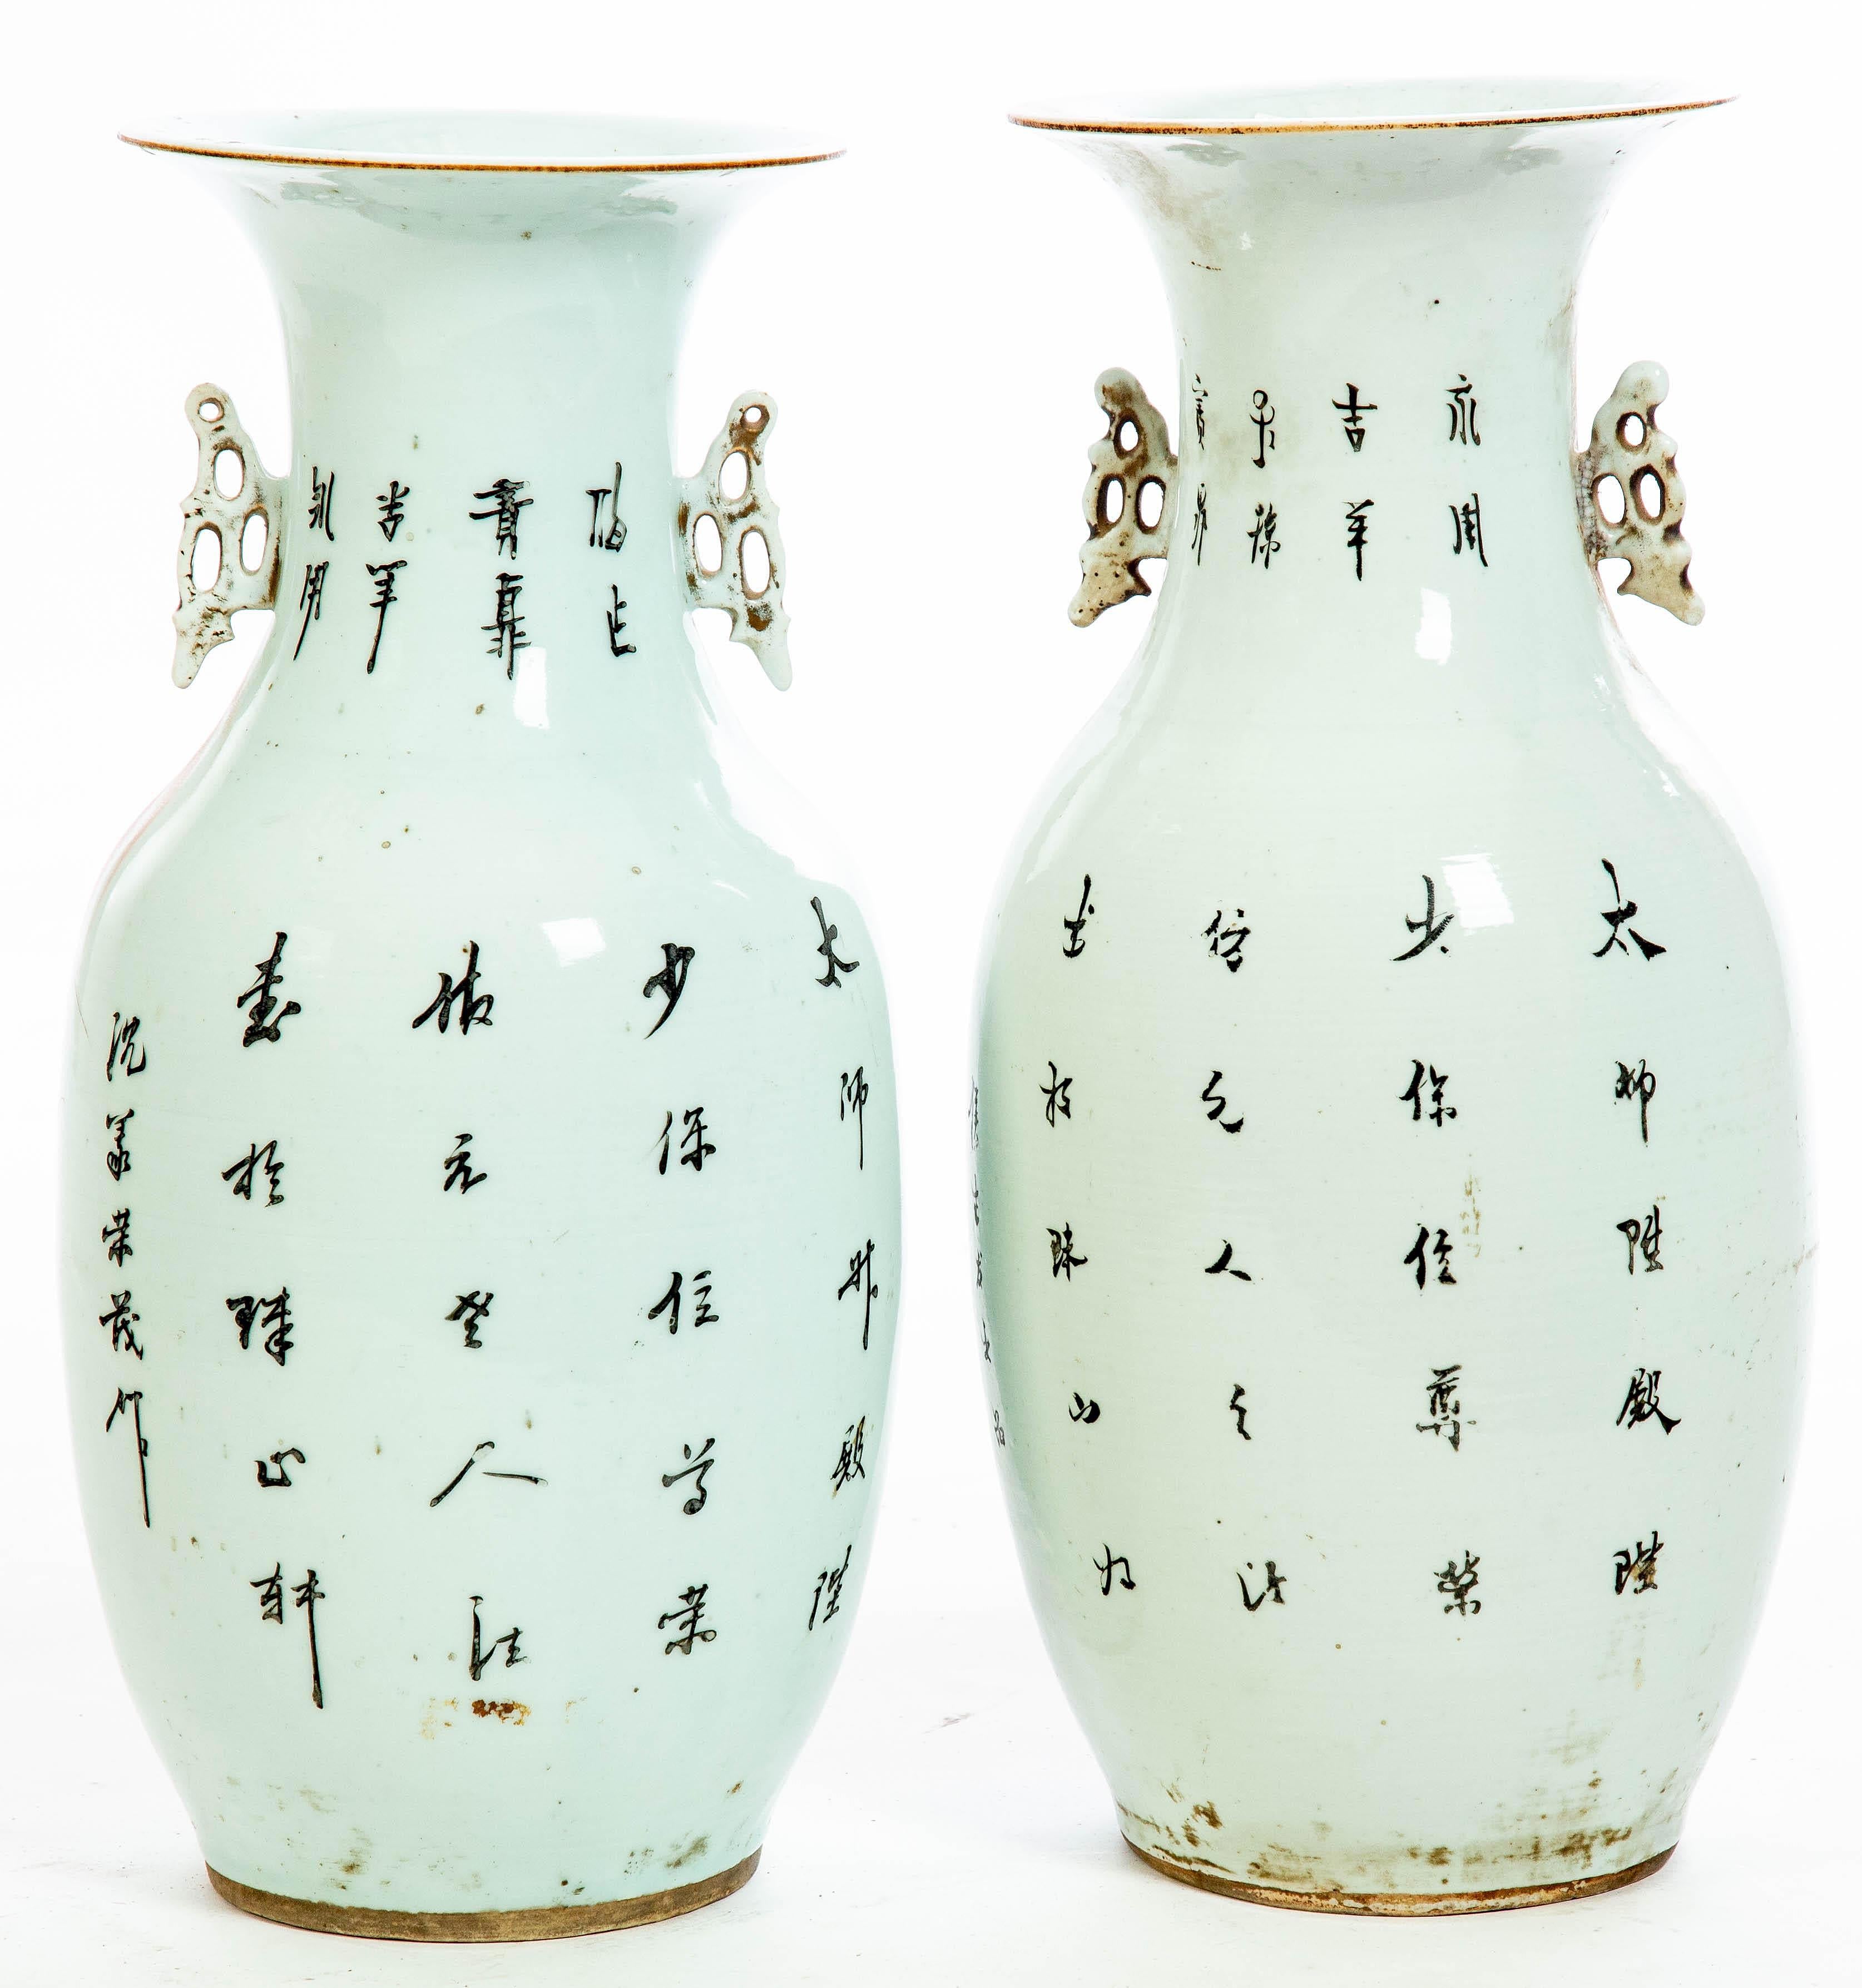 Pair of Antique Hand Painted Chinese Jars With Foo Dogs and Inscriptions - Qing Art by Unknown